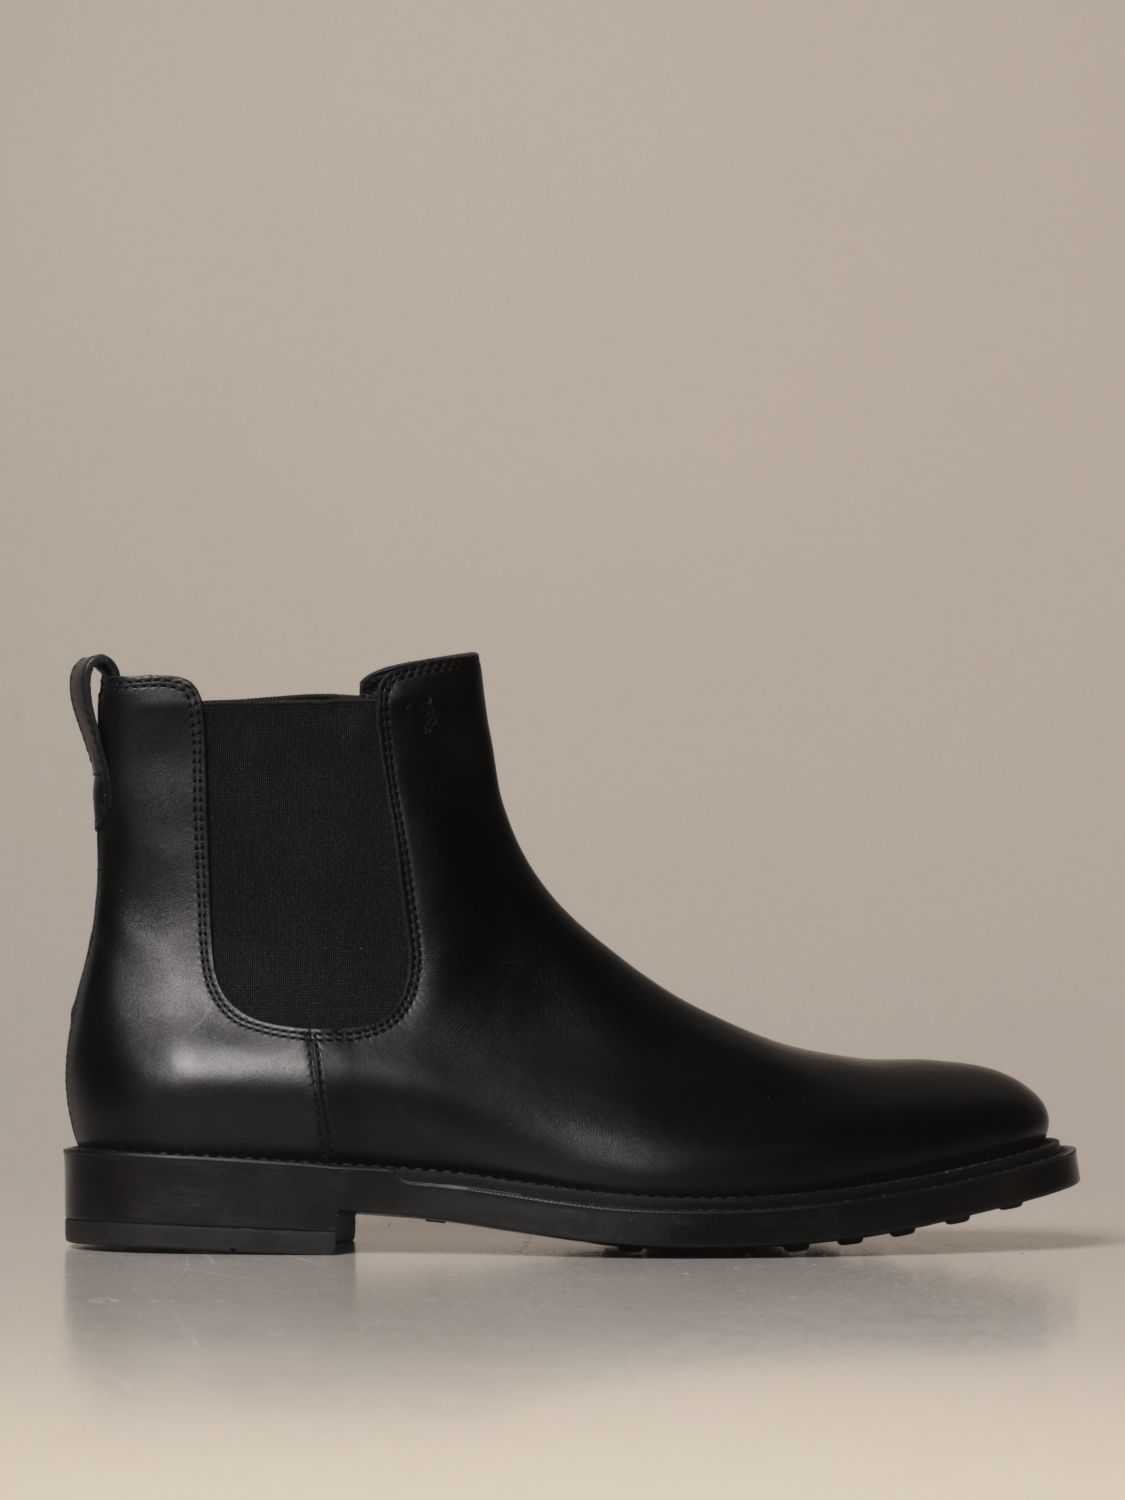 tods black boots